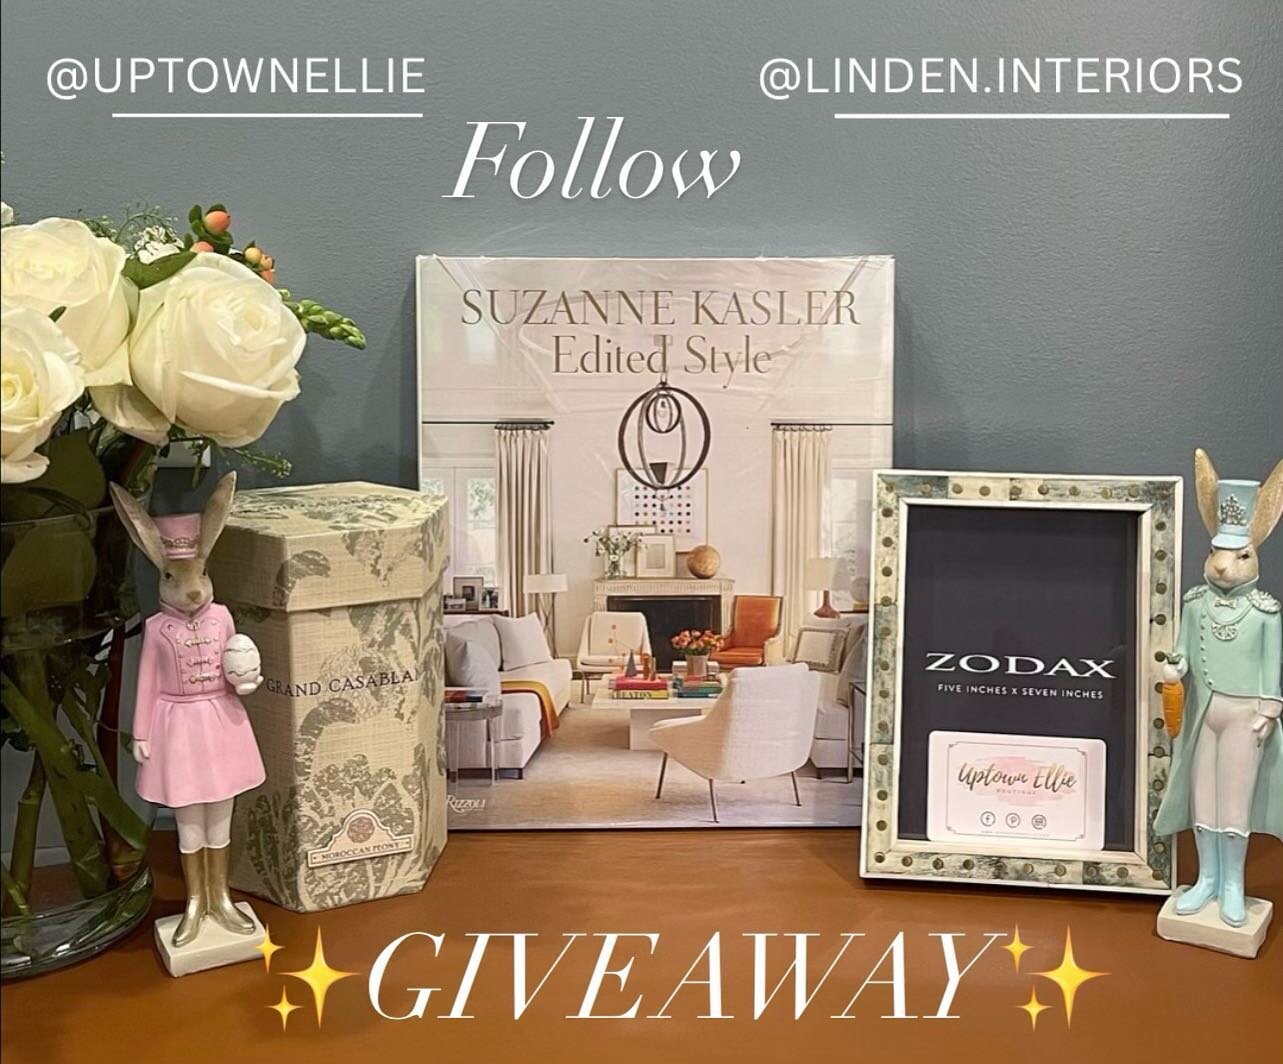 ✨🌷 SPRING GIVEAWAY 🌷 ✨
In honor of it being International Women&rsquo;s Month, I&rsquo;m partnering with my favorite store and great friend @uptownellie for a Spring Giveaway.

One lucky winner will receive: 

🌷Casablanca diffuser, Peony scent 

?